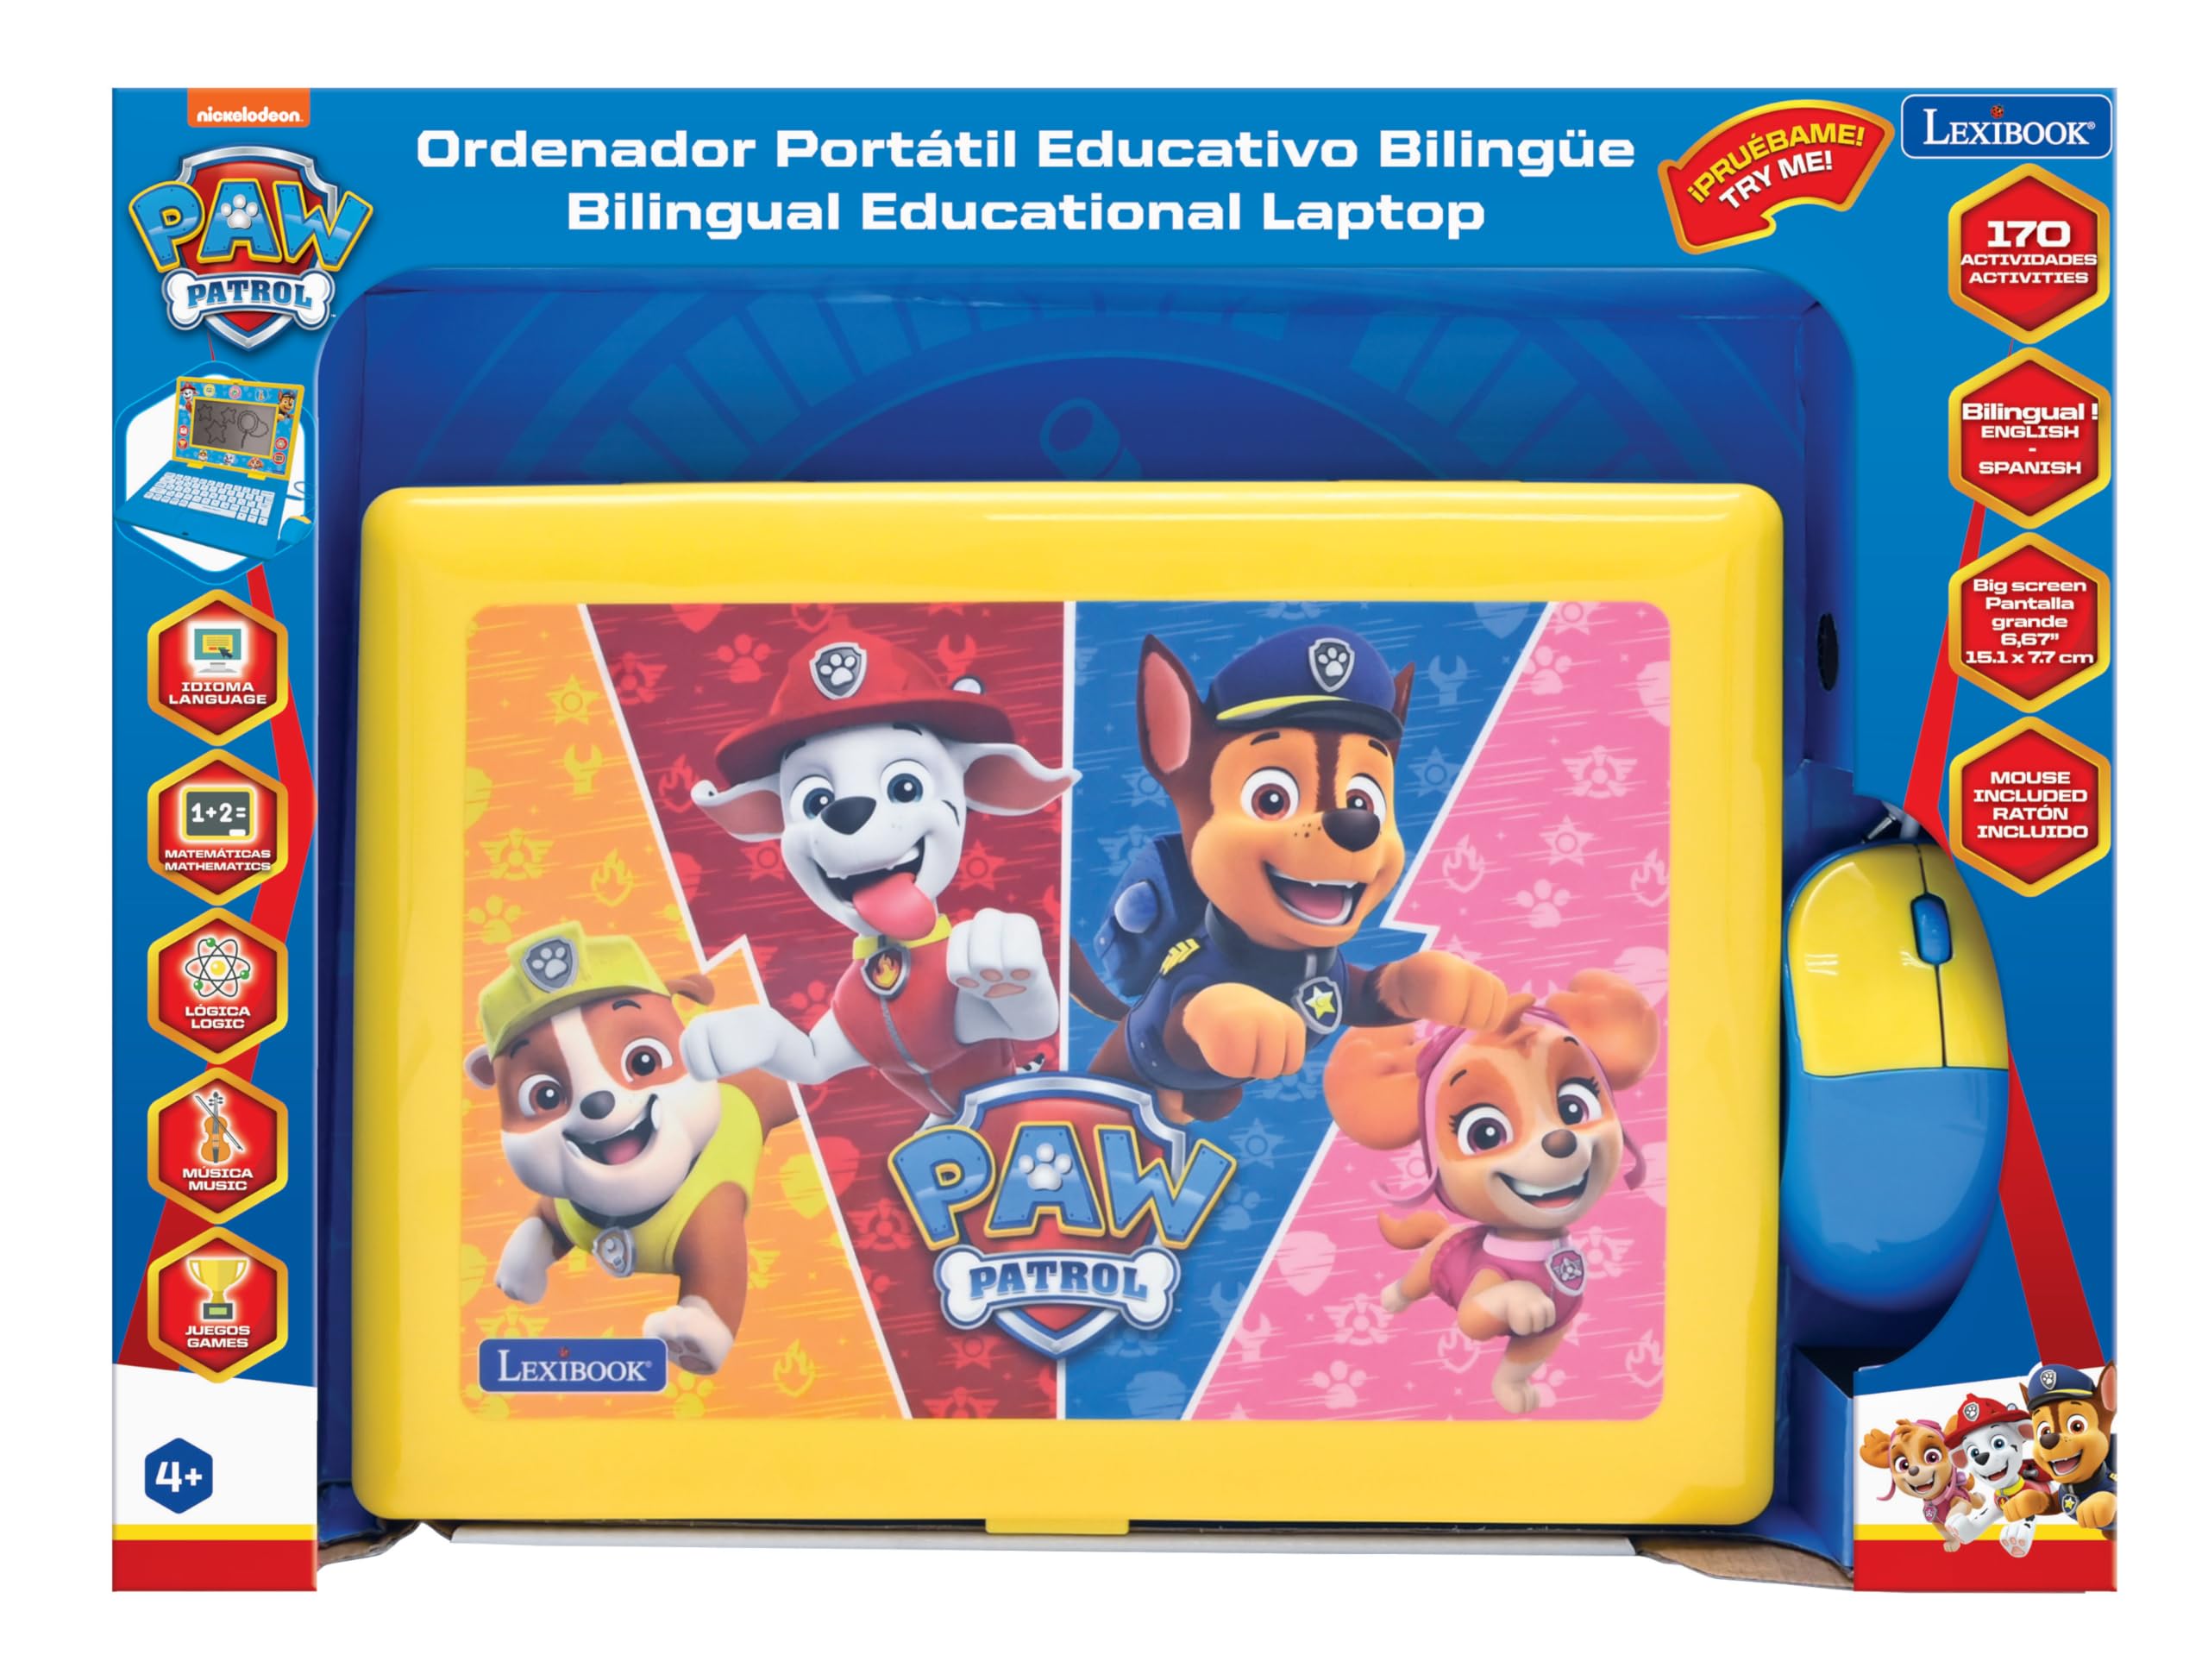 LEXiBOOK - Paw Patrol - Bilingual and Educational Laptop English/Spanish - Toy for Children, 170 Activities to Learn, Play Games and Music, Large Screen - JC599PAi2